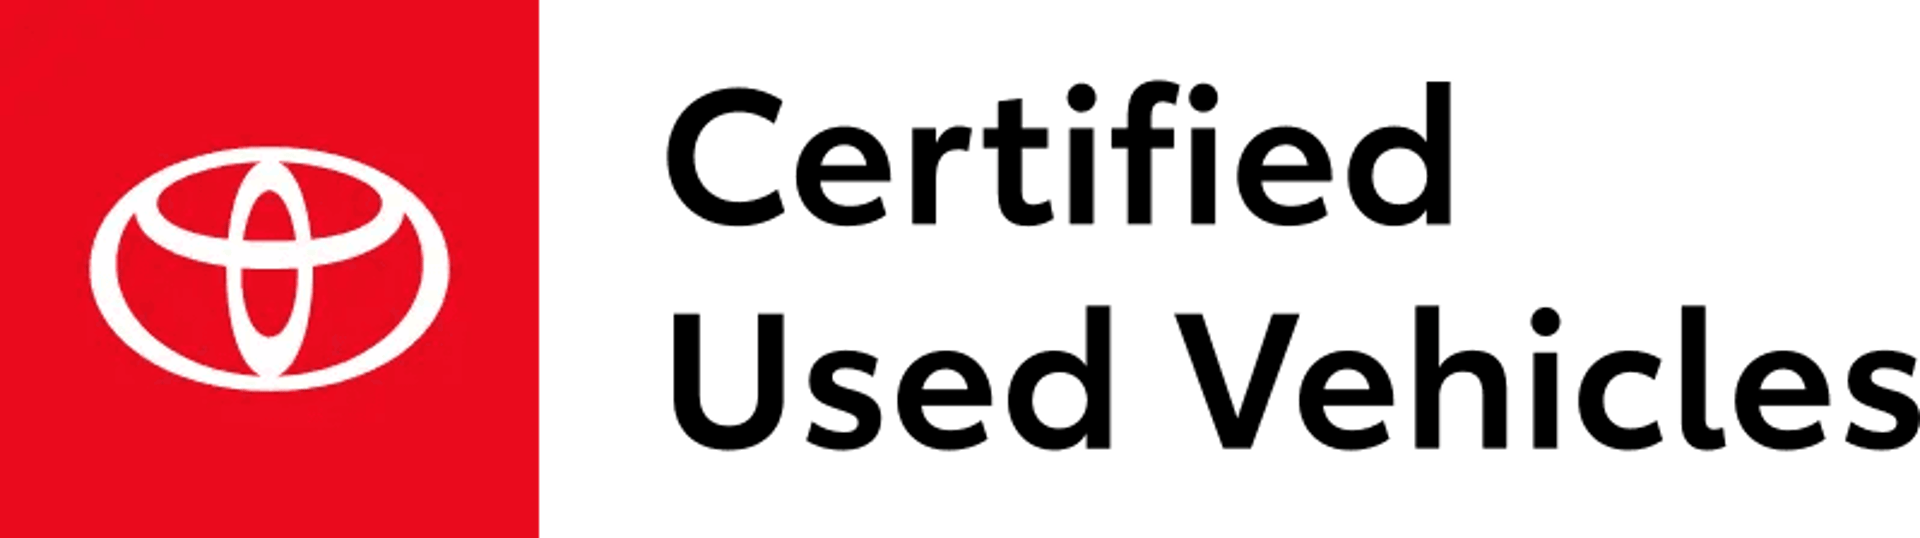 Certified Used Vehicel